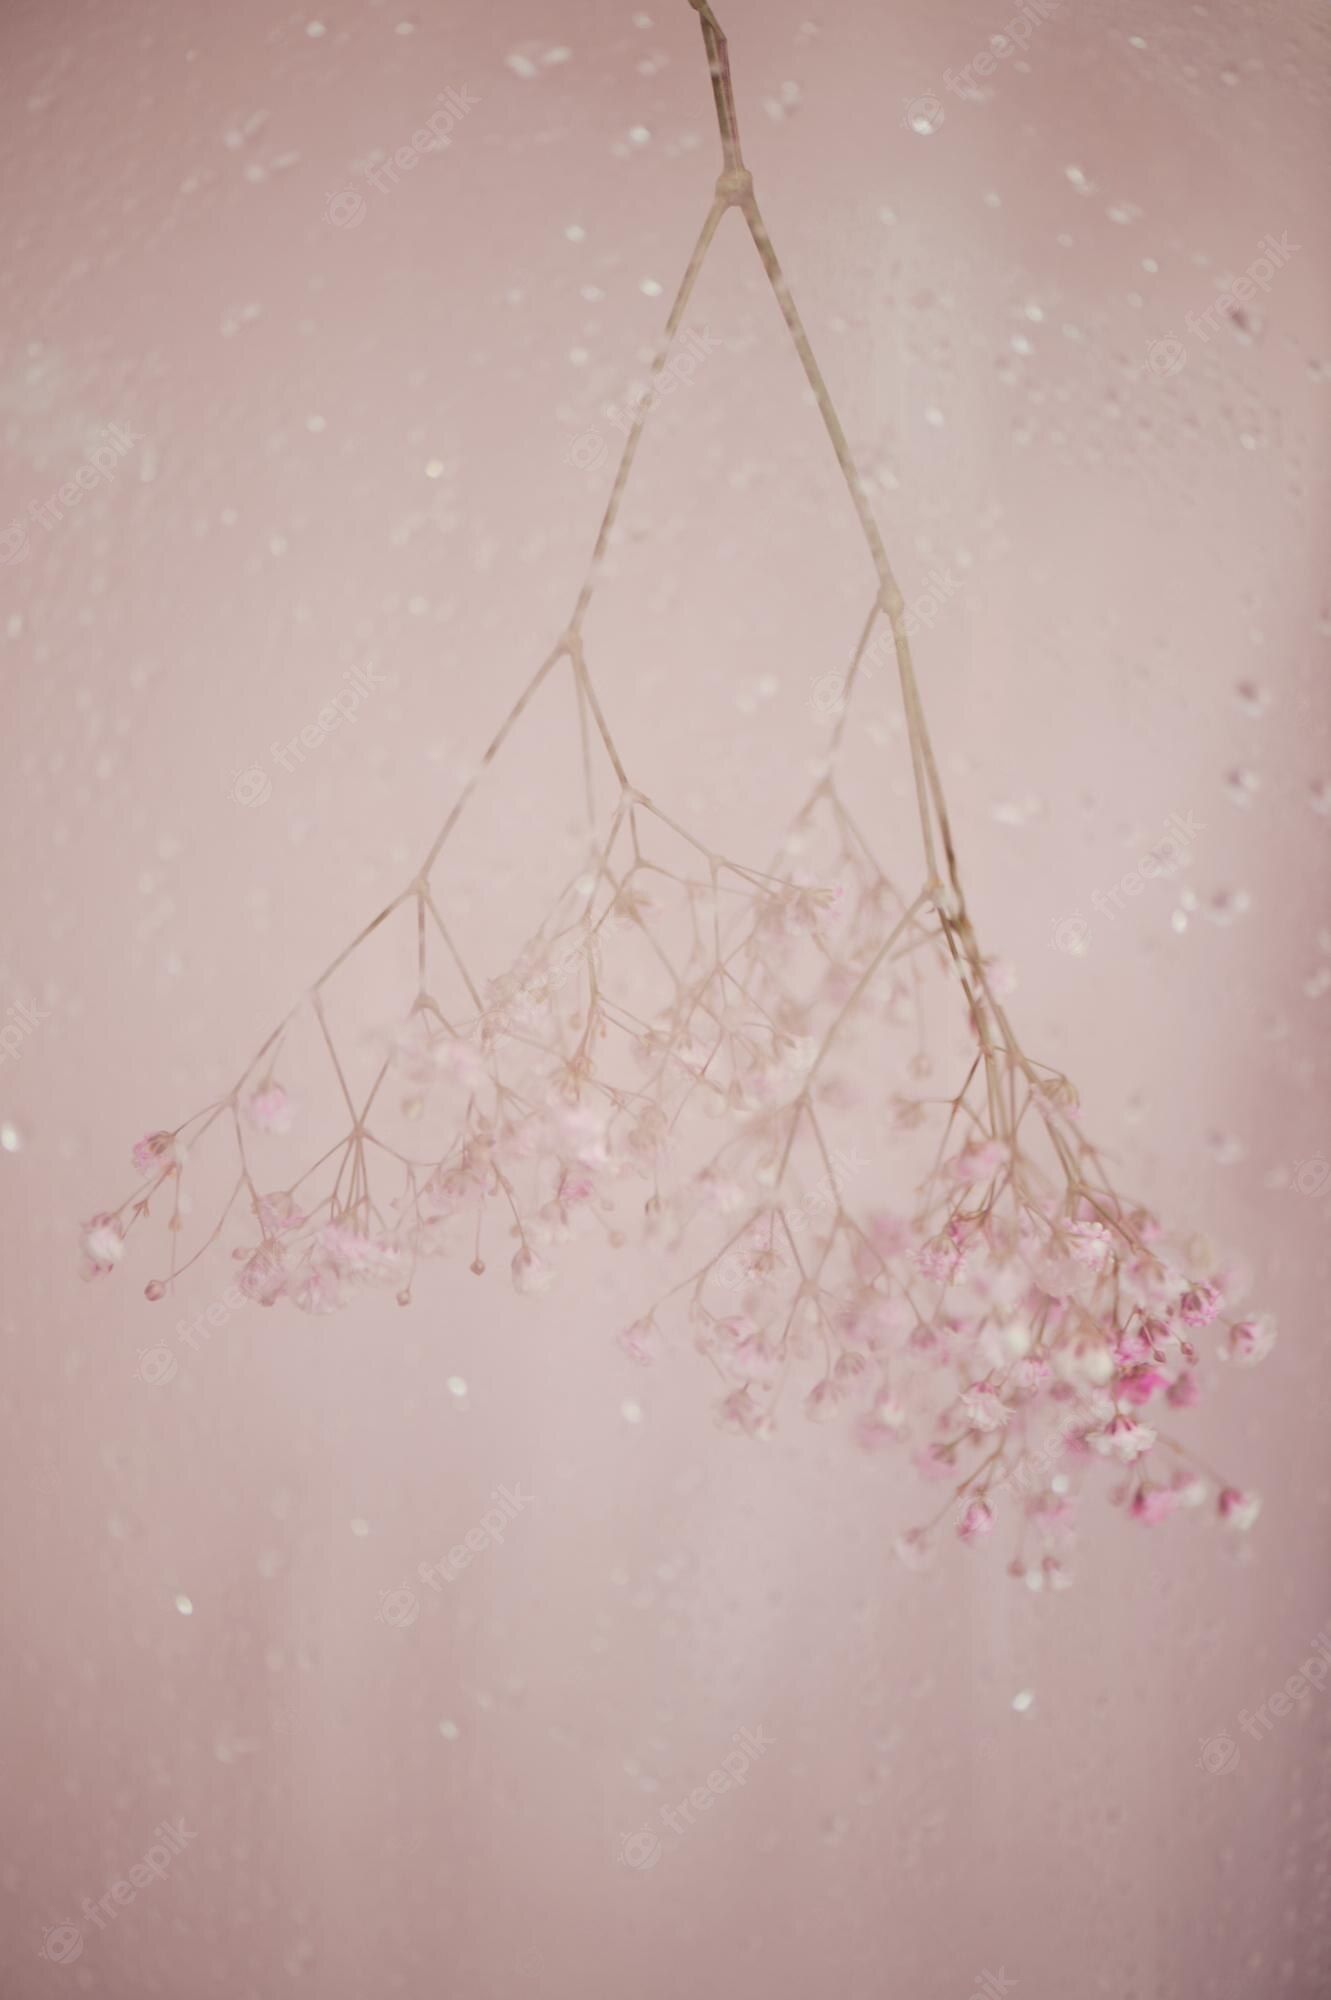 A branch of baby's breath flowers hanging in front of a pink wall - Blush, pink